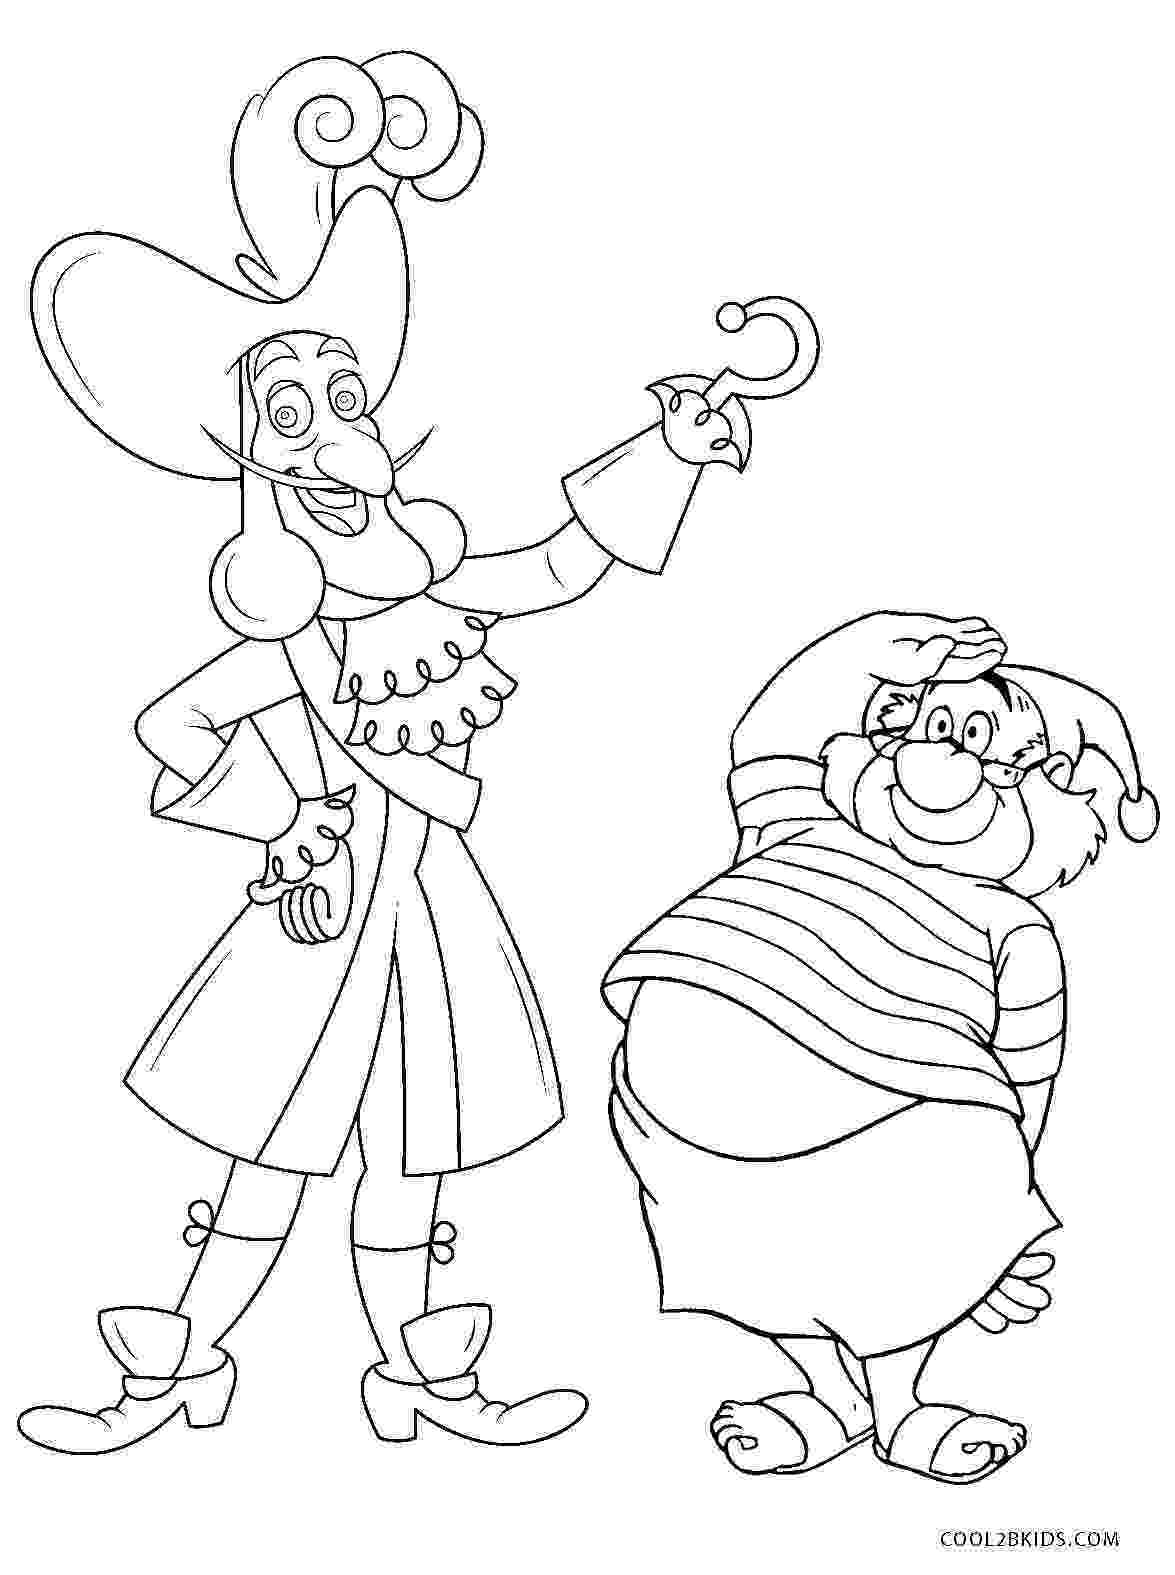 peter pan coloring pages free free printable peter pan coloring pages for kids peter coloring pan free pages 